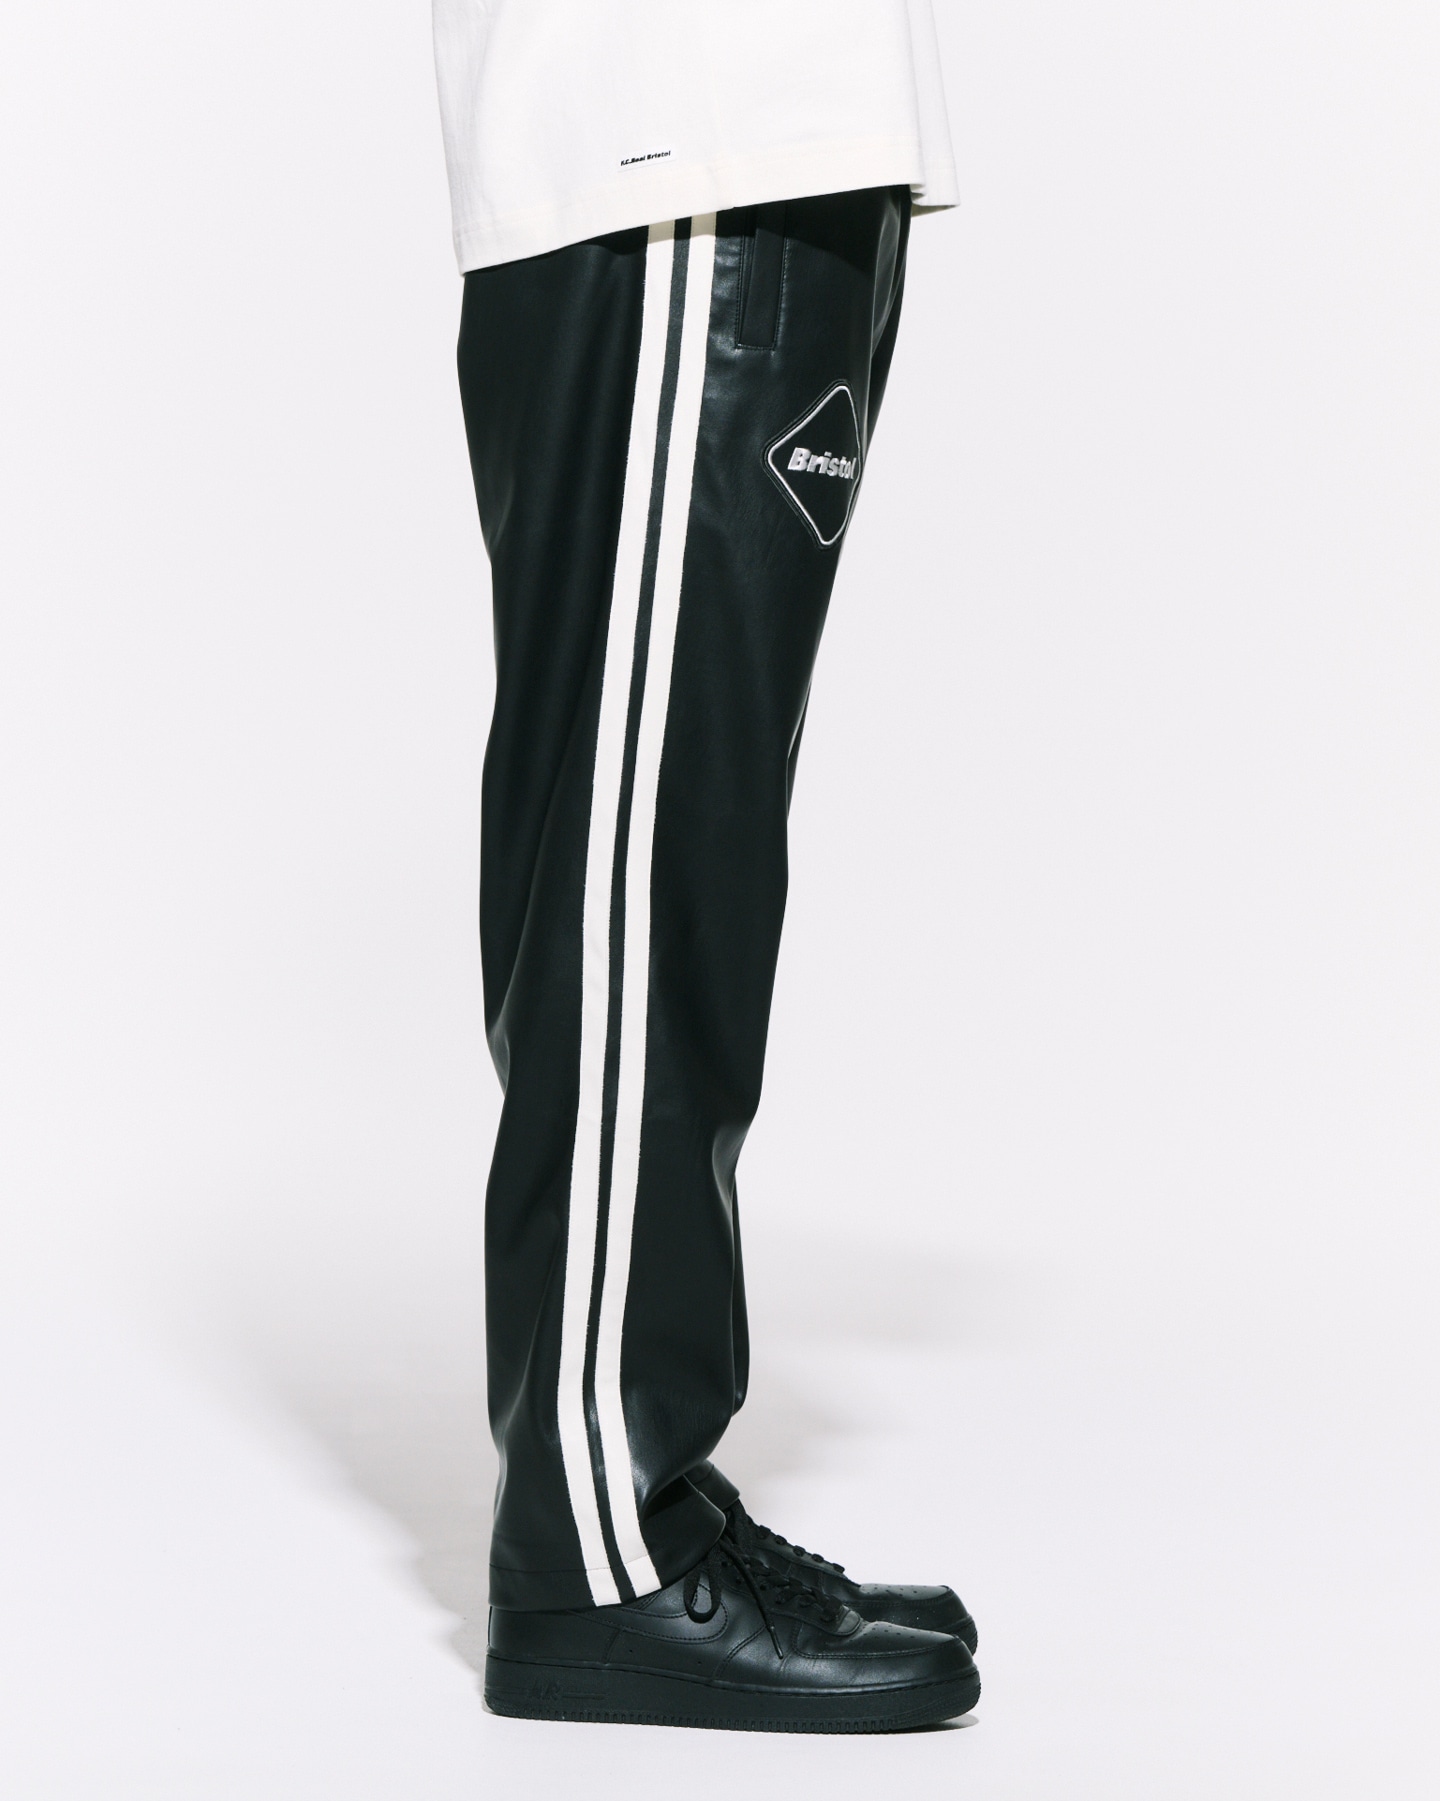 SYNTHETIC LEATHER PANTS(XL BLACK) - SOPH.